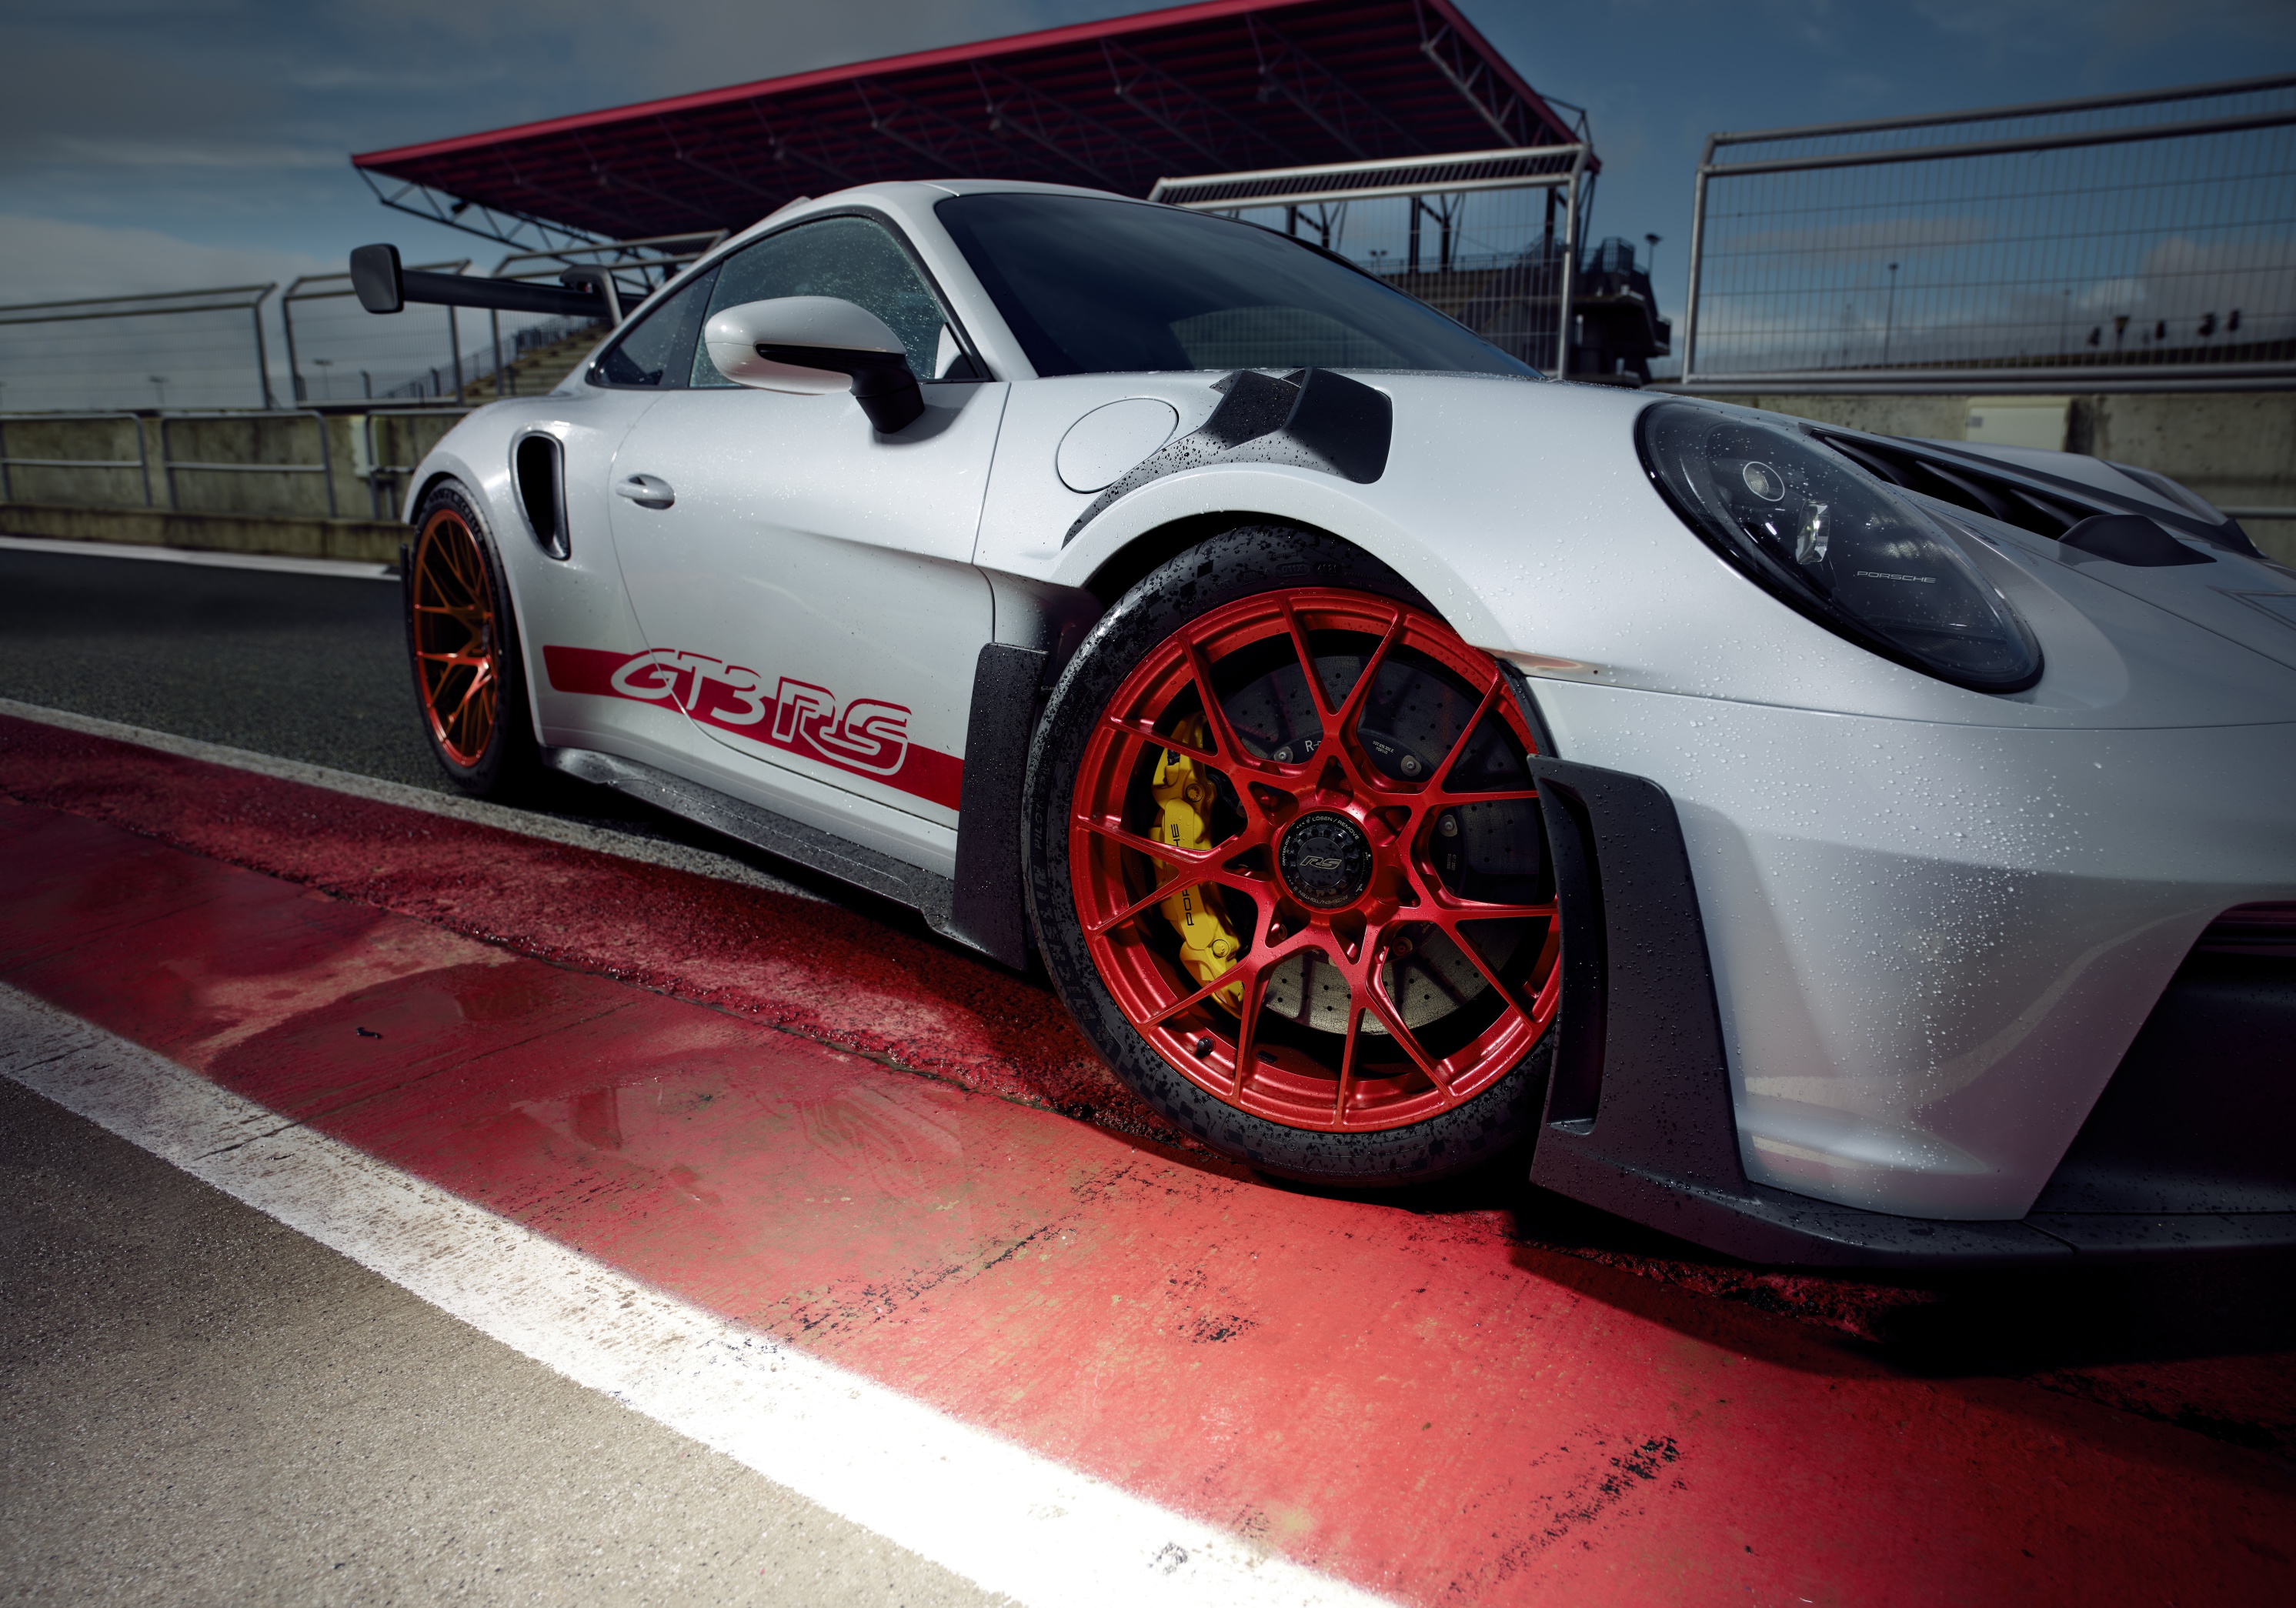 Close-up of Porsche 911 GT3 RS parked on racetrack